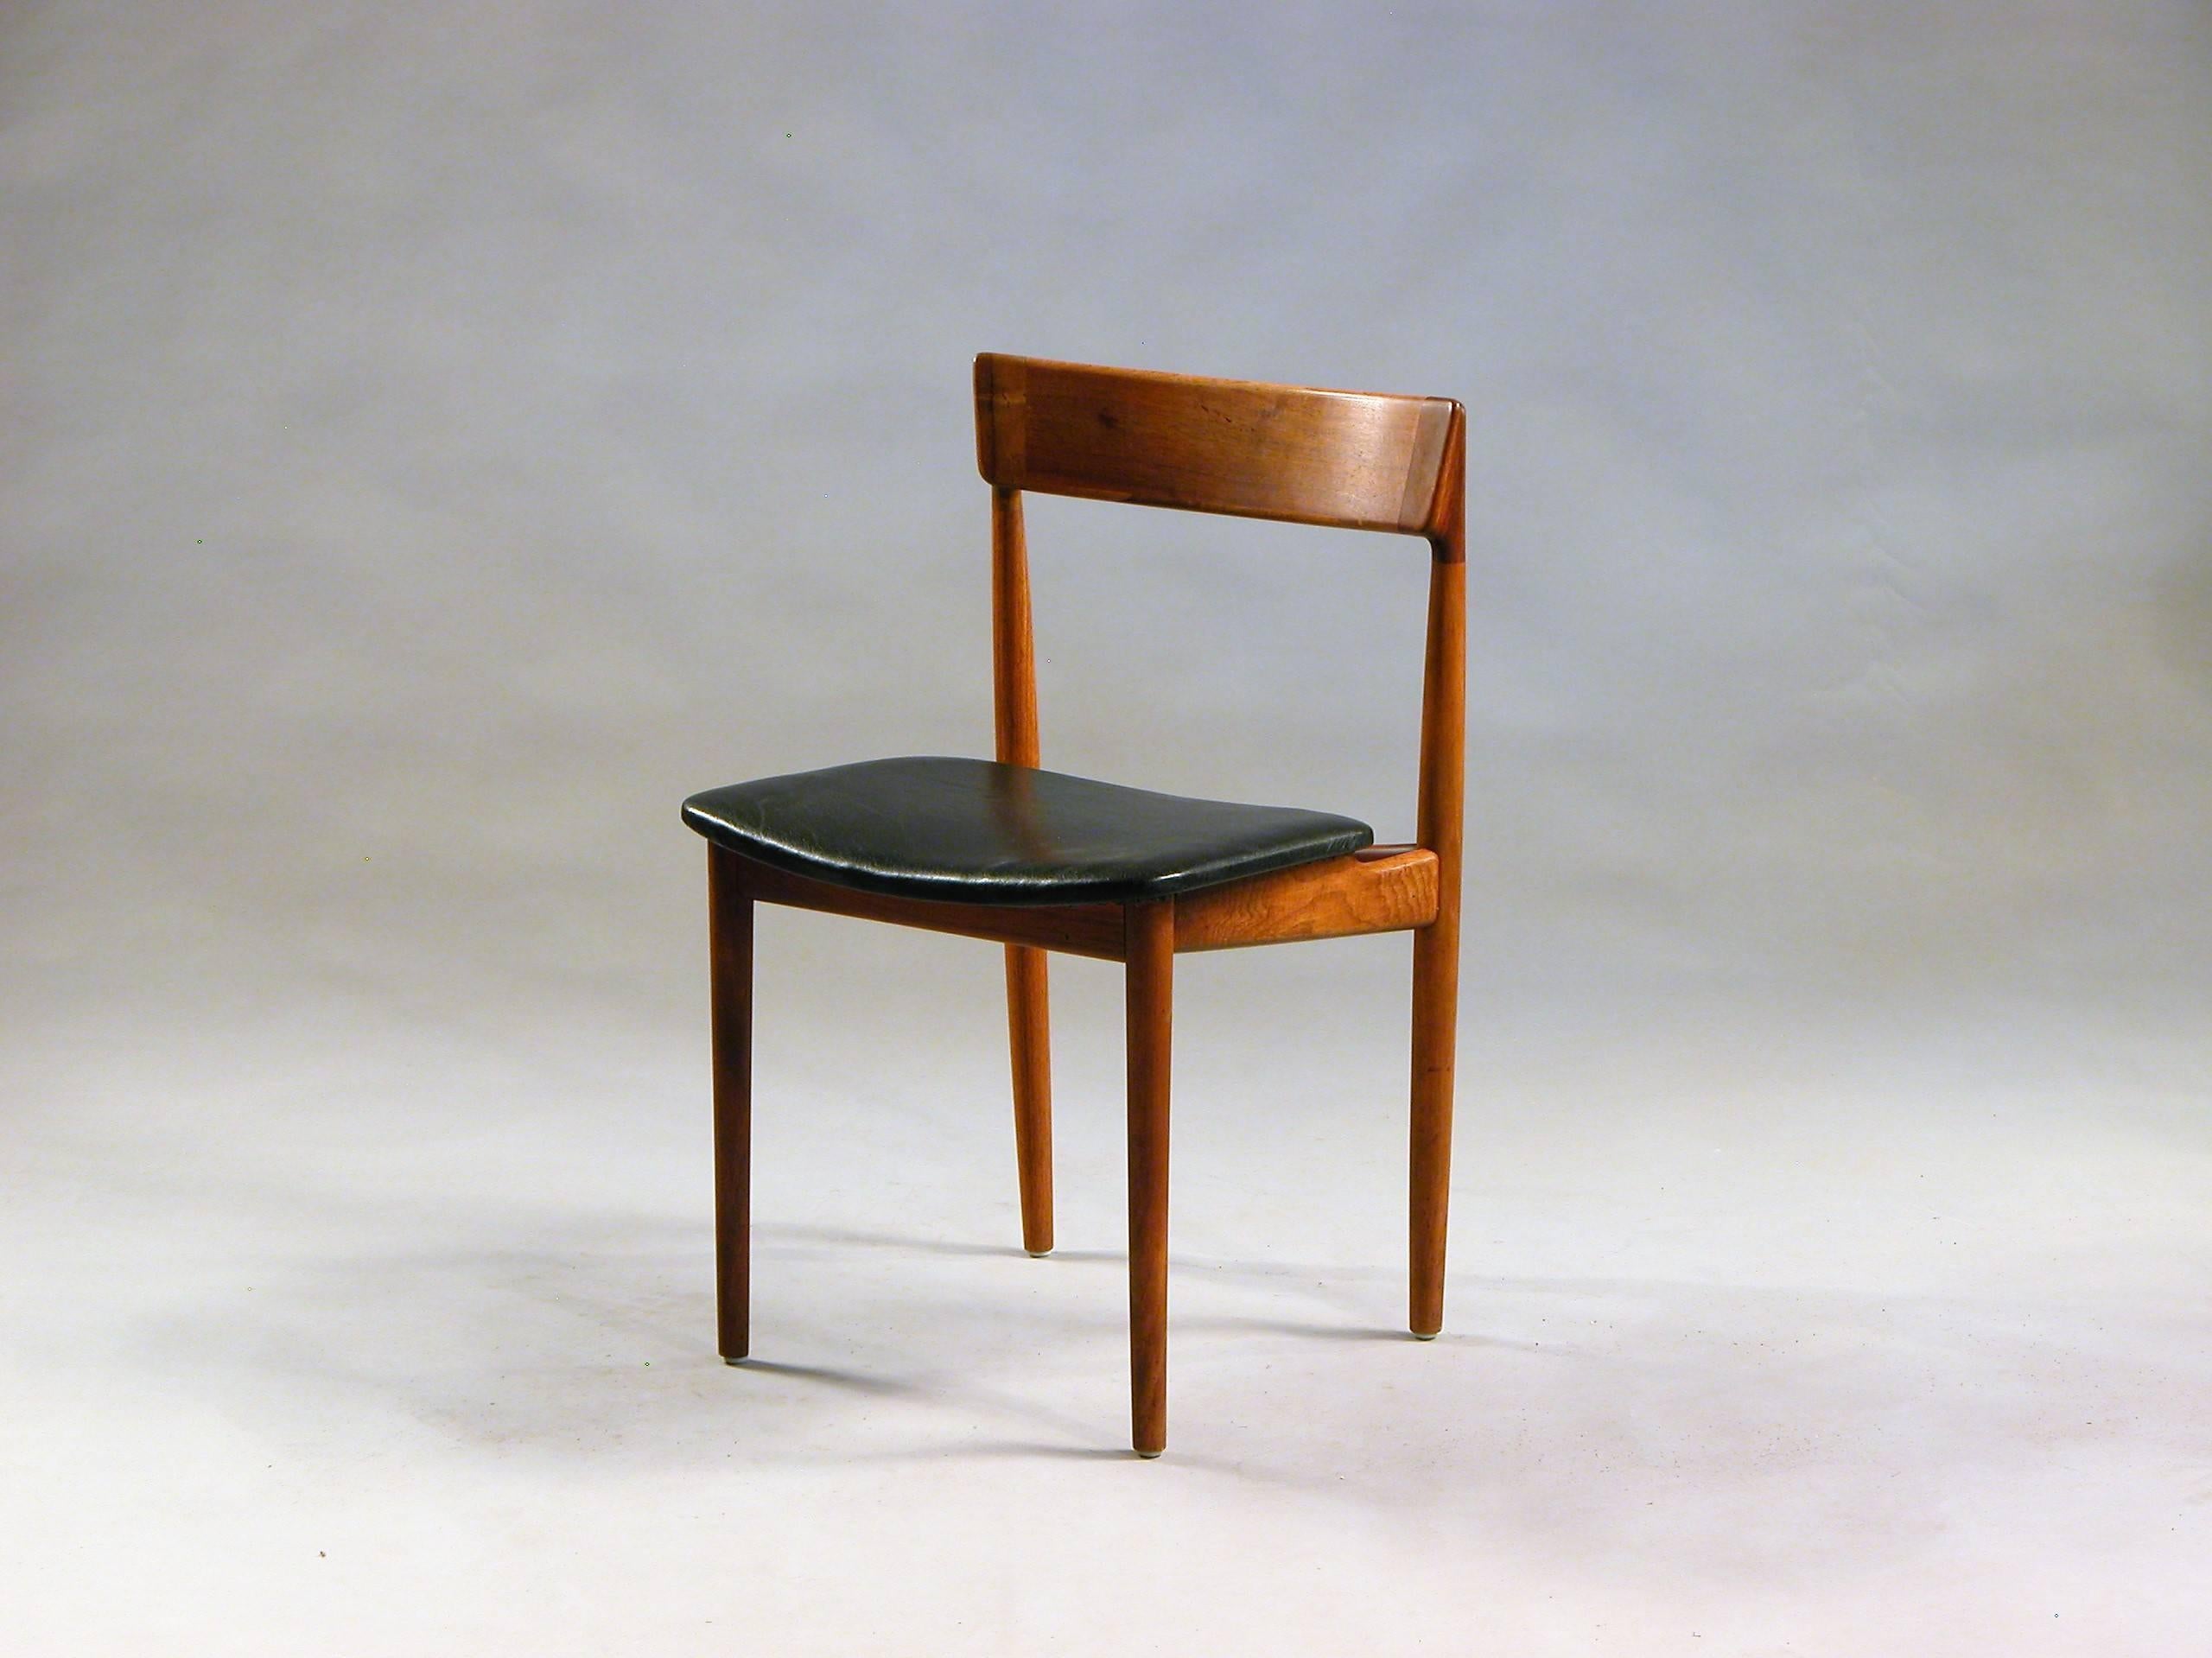 Set of four model 39 dining chairs in teak and black leather designed by Henry Rosengren Hansen for Brande Møbelindustri, Denmark, in the 1960s. 

The chairs are made of solid teak with leather seats. The chairs are well crafted with the special